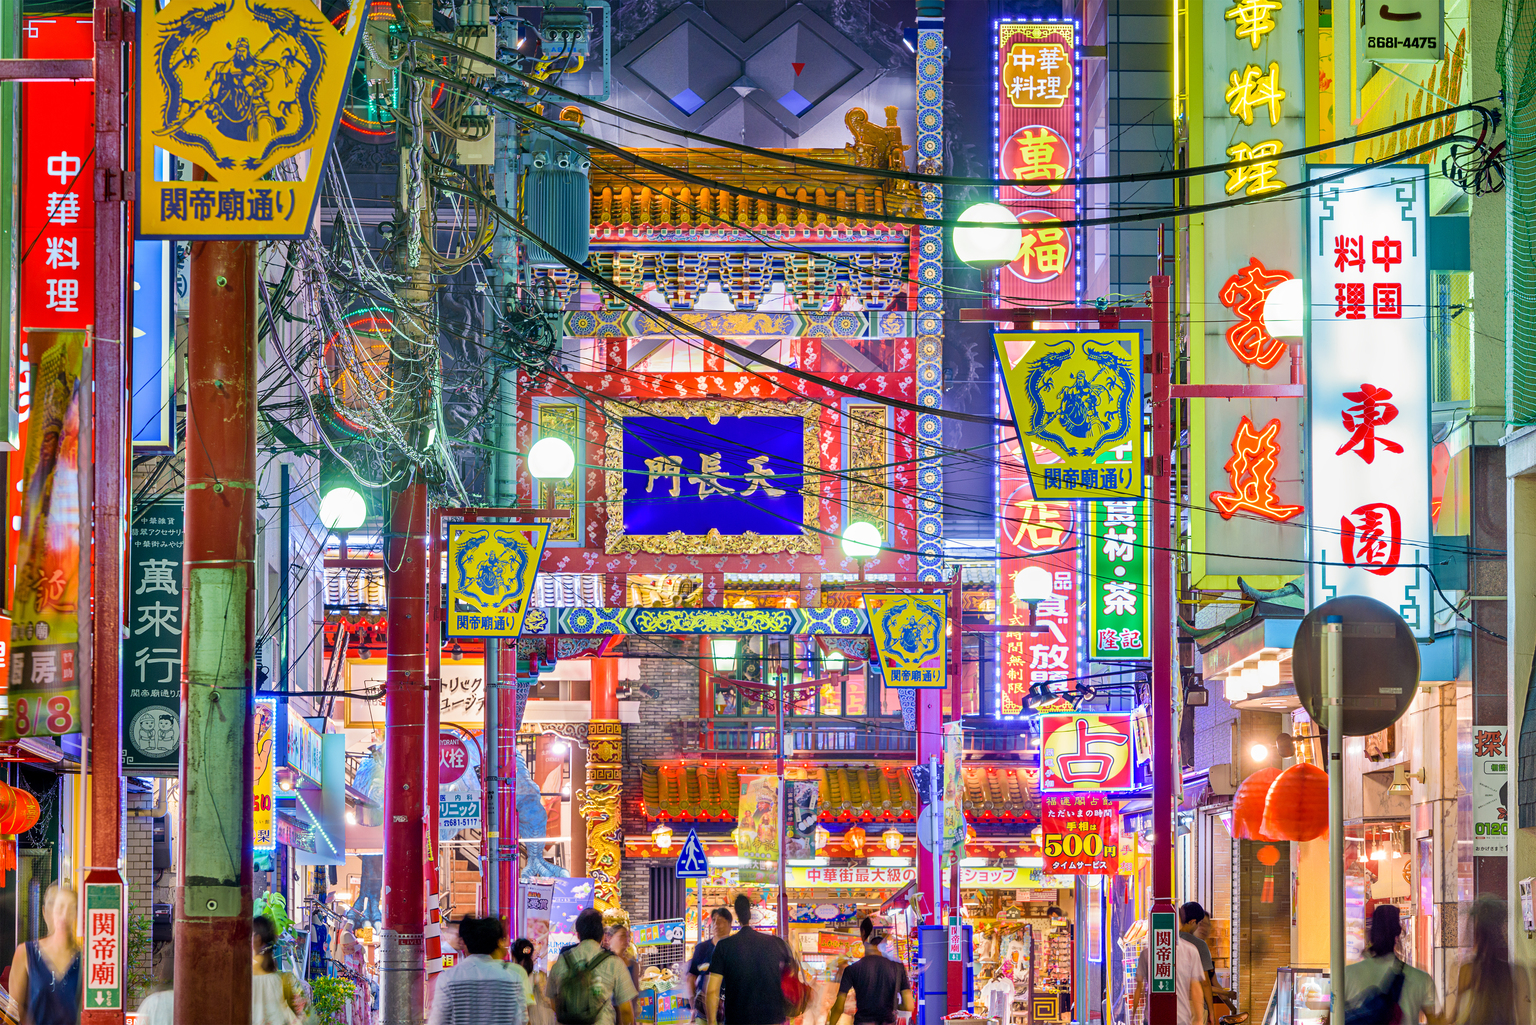 Area Guide: Where to Shop, Eat, and Play in Chinatown